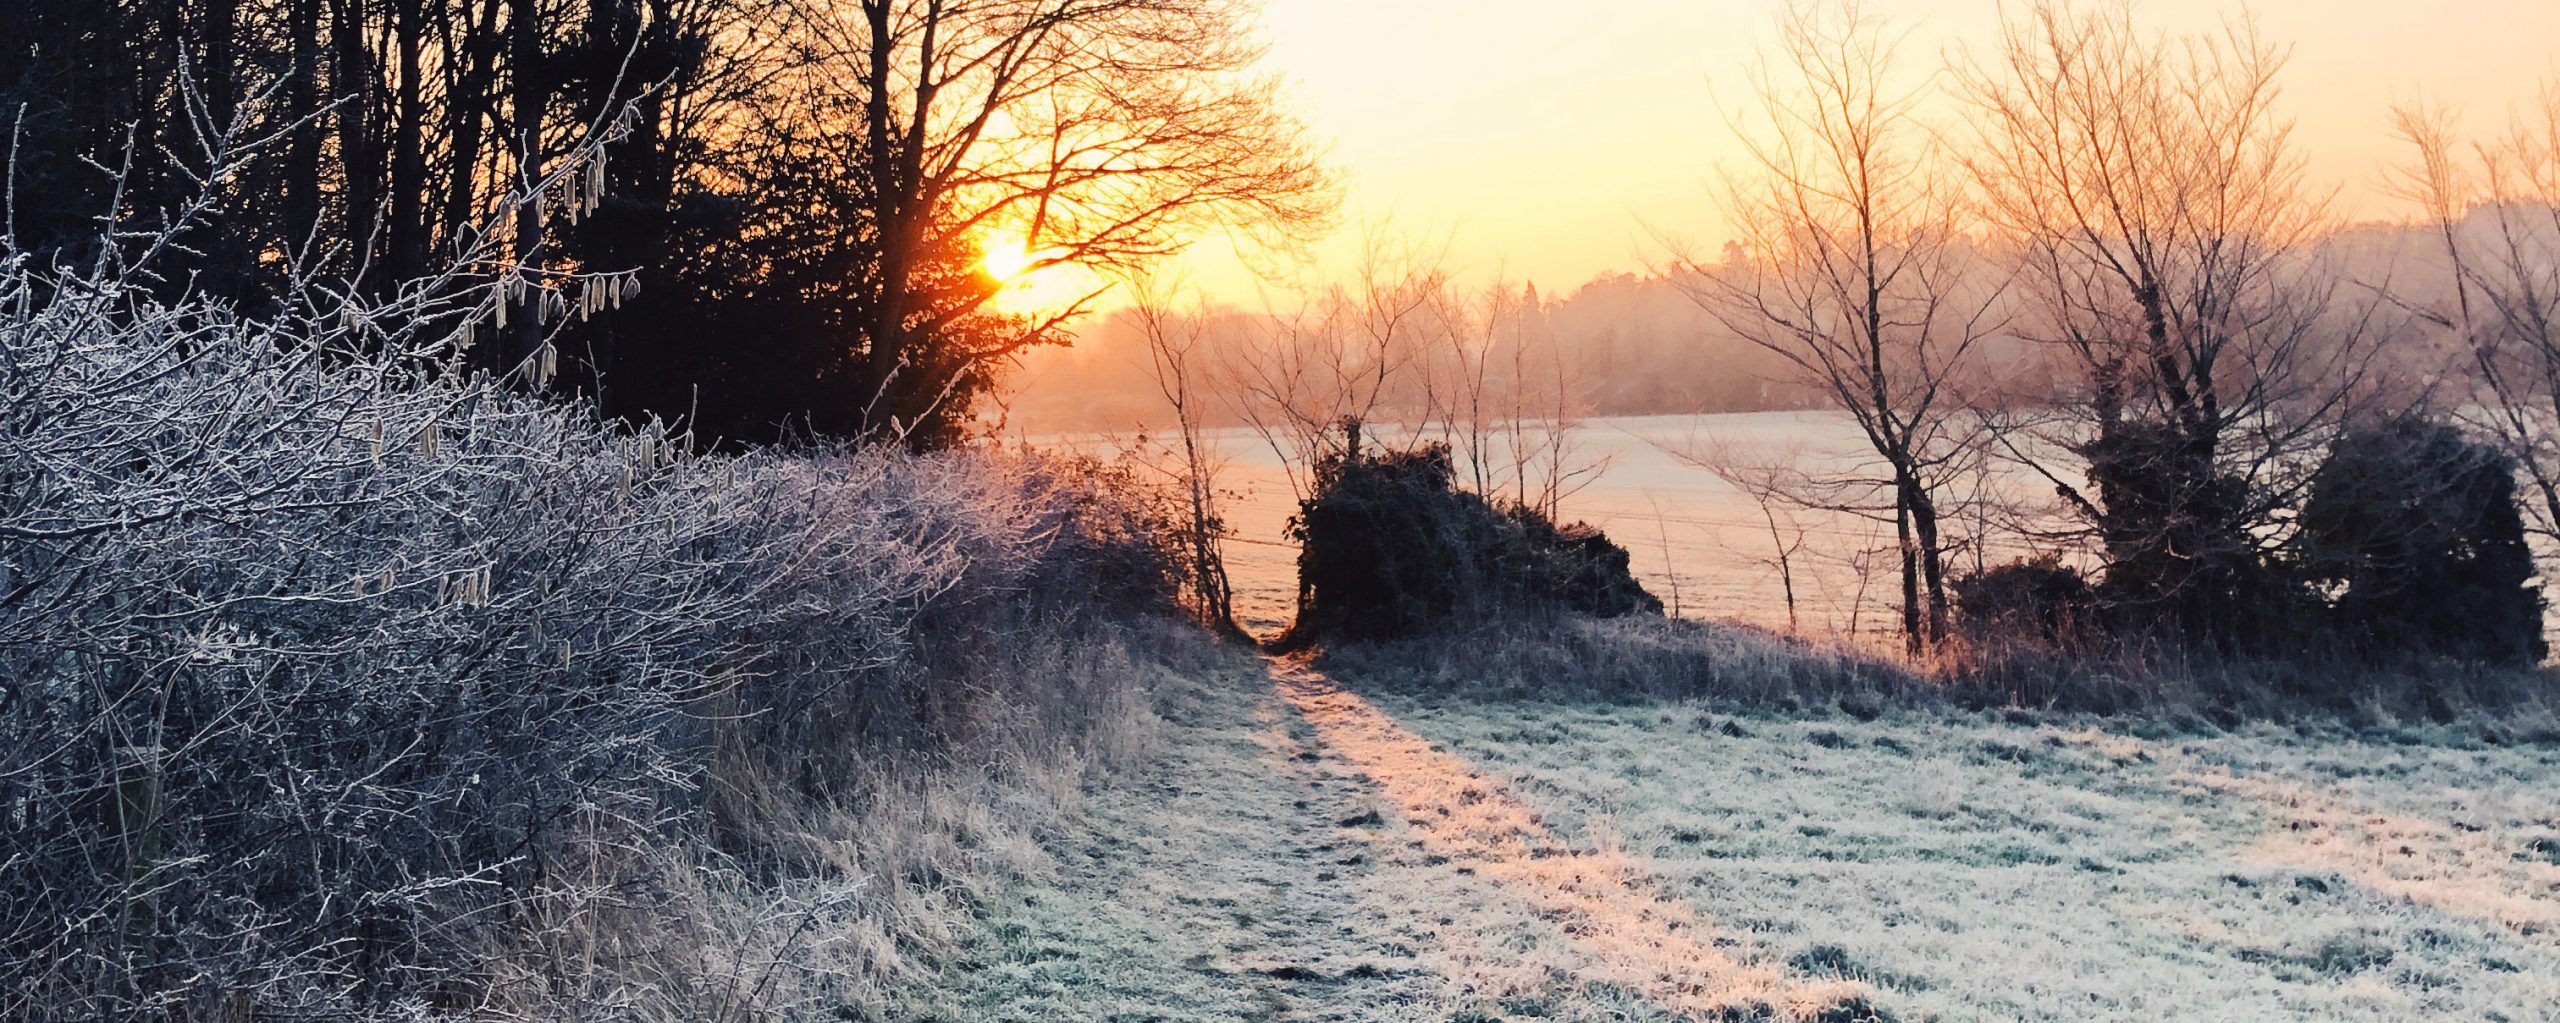 Frosty sunrise over fields and trees